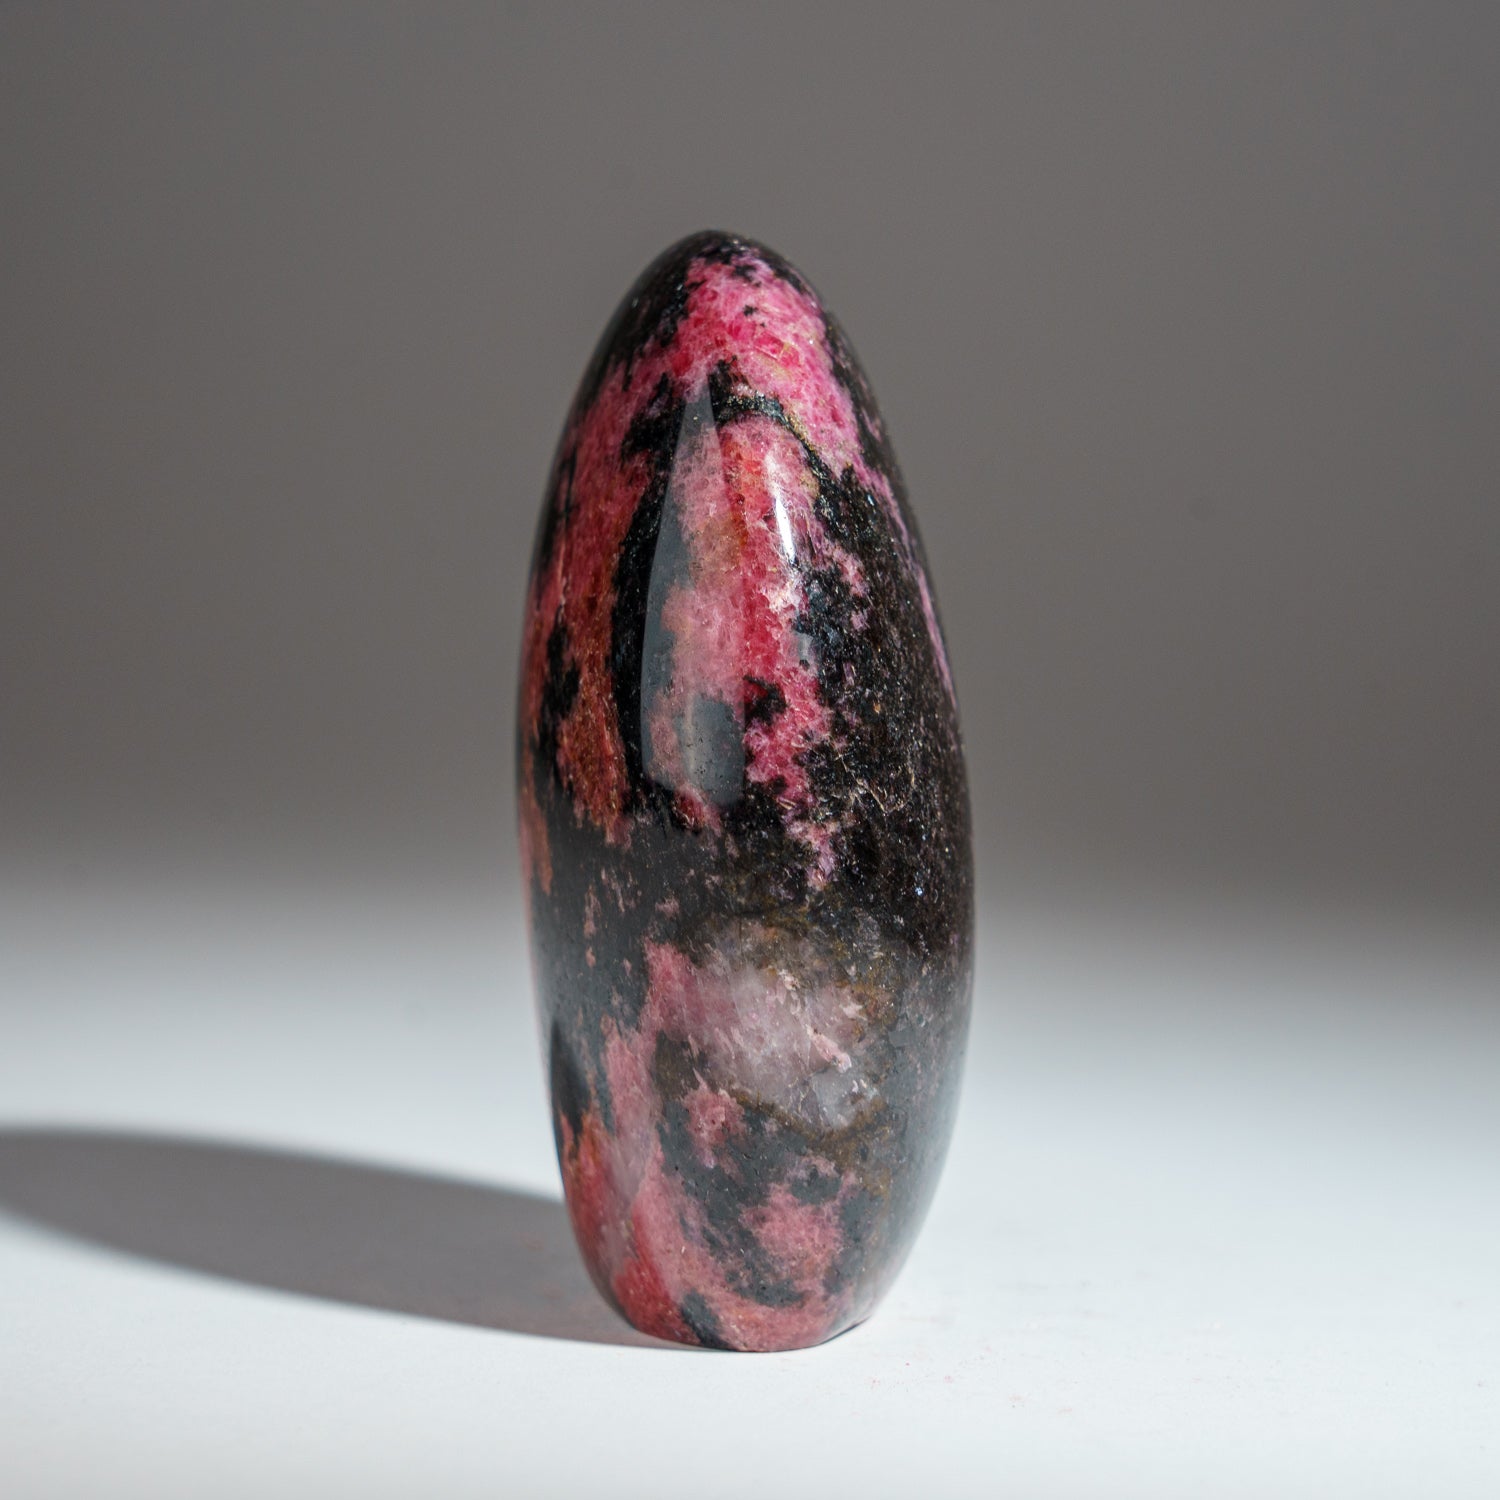 Polished Imperial Rhodonite Freeform from Madagascar (1.7 lbs)